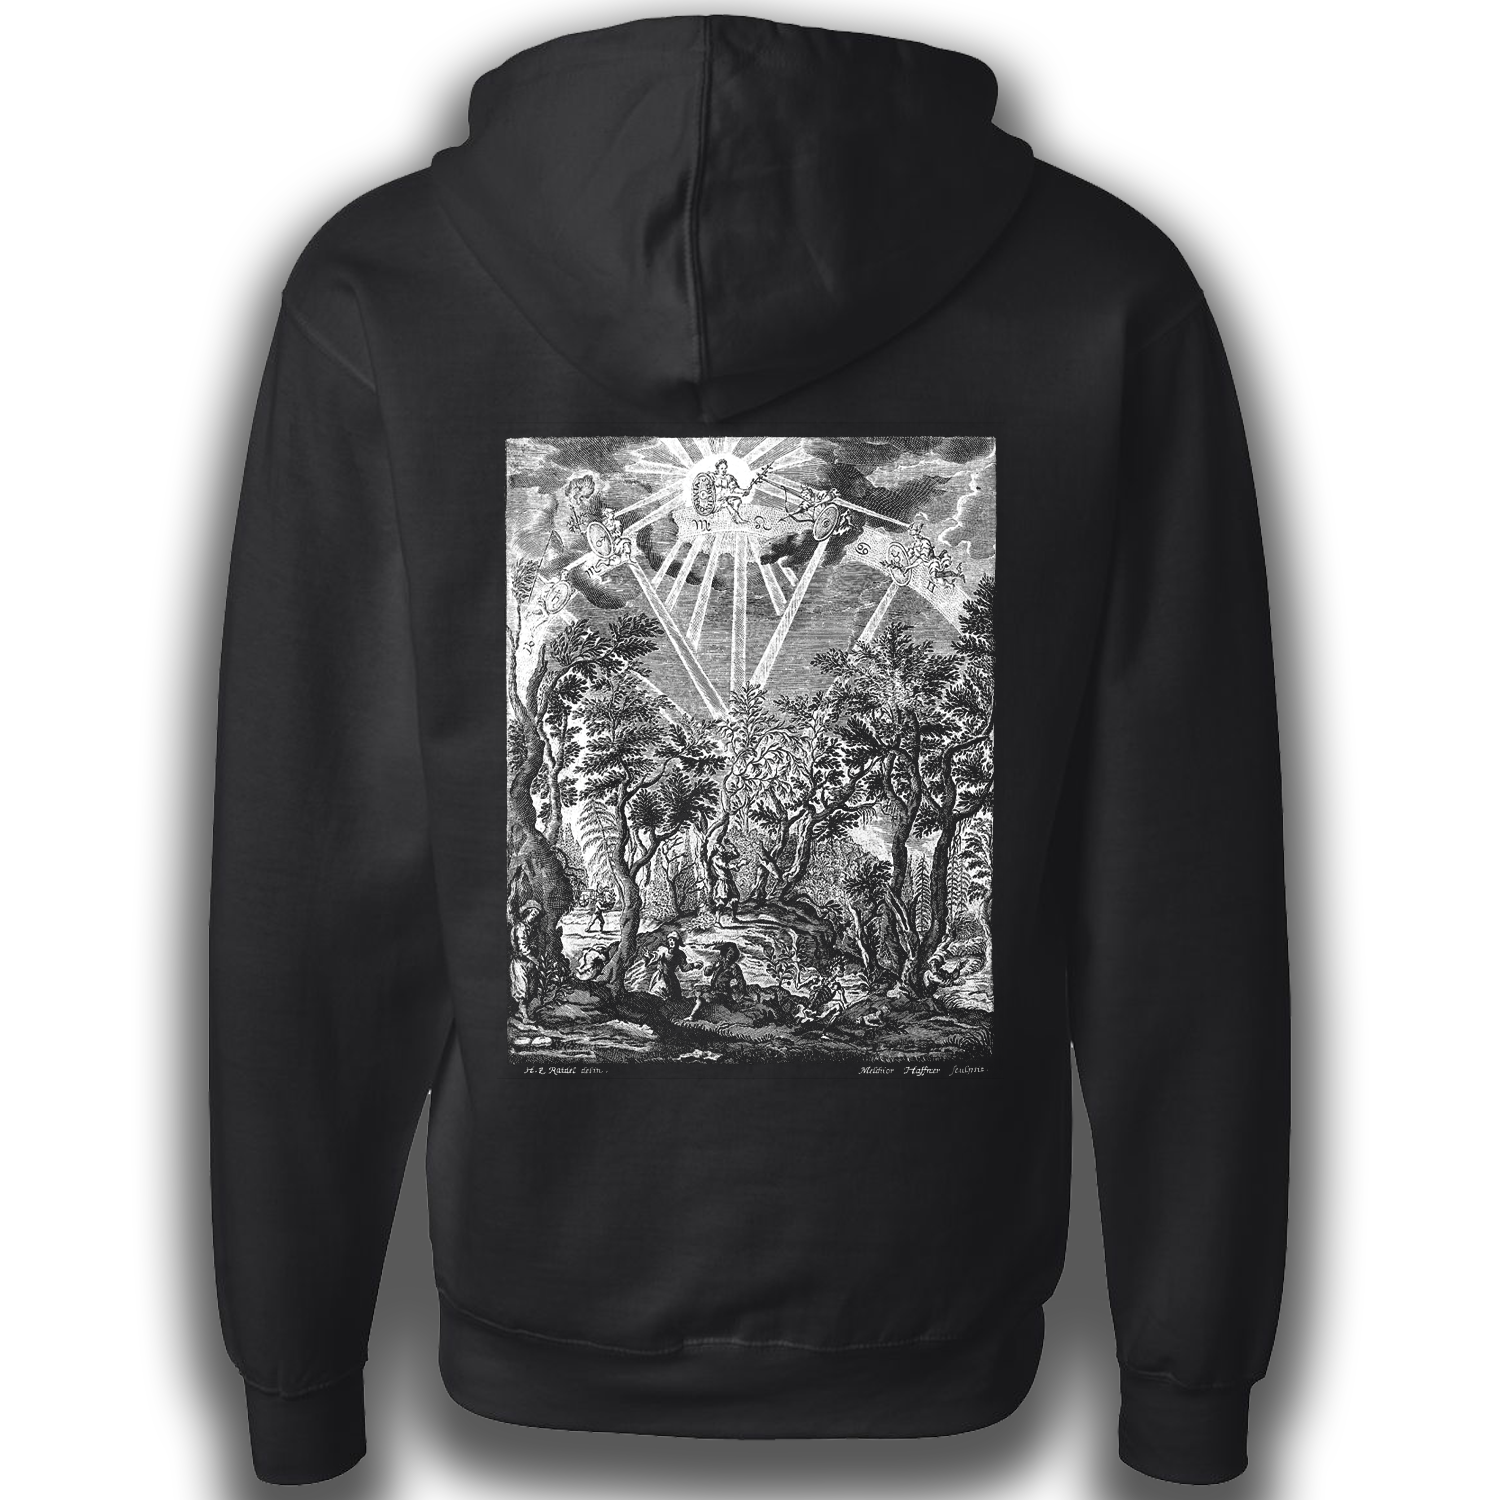 A black and white hoodie featuring artwork from Strychnomania explicans strychni manici antiquorum; original engravement described as "A man suffering madness from having eaten poisonous plant" by Melchior Haffner, published 1677.